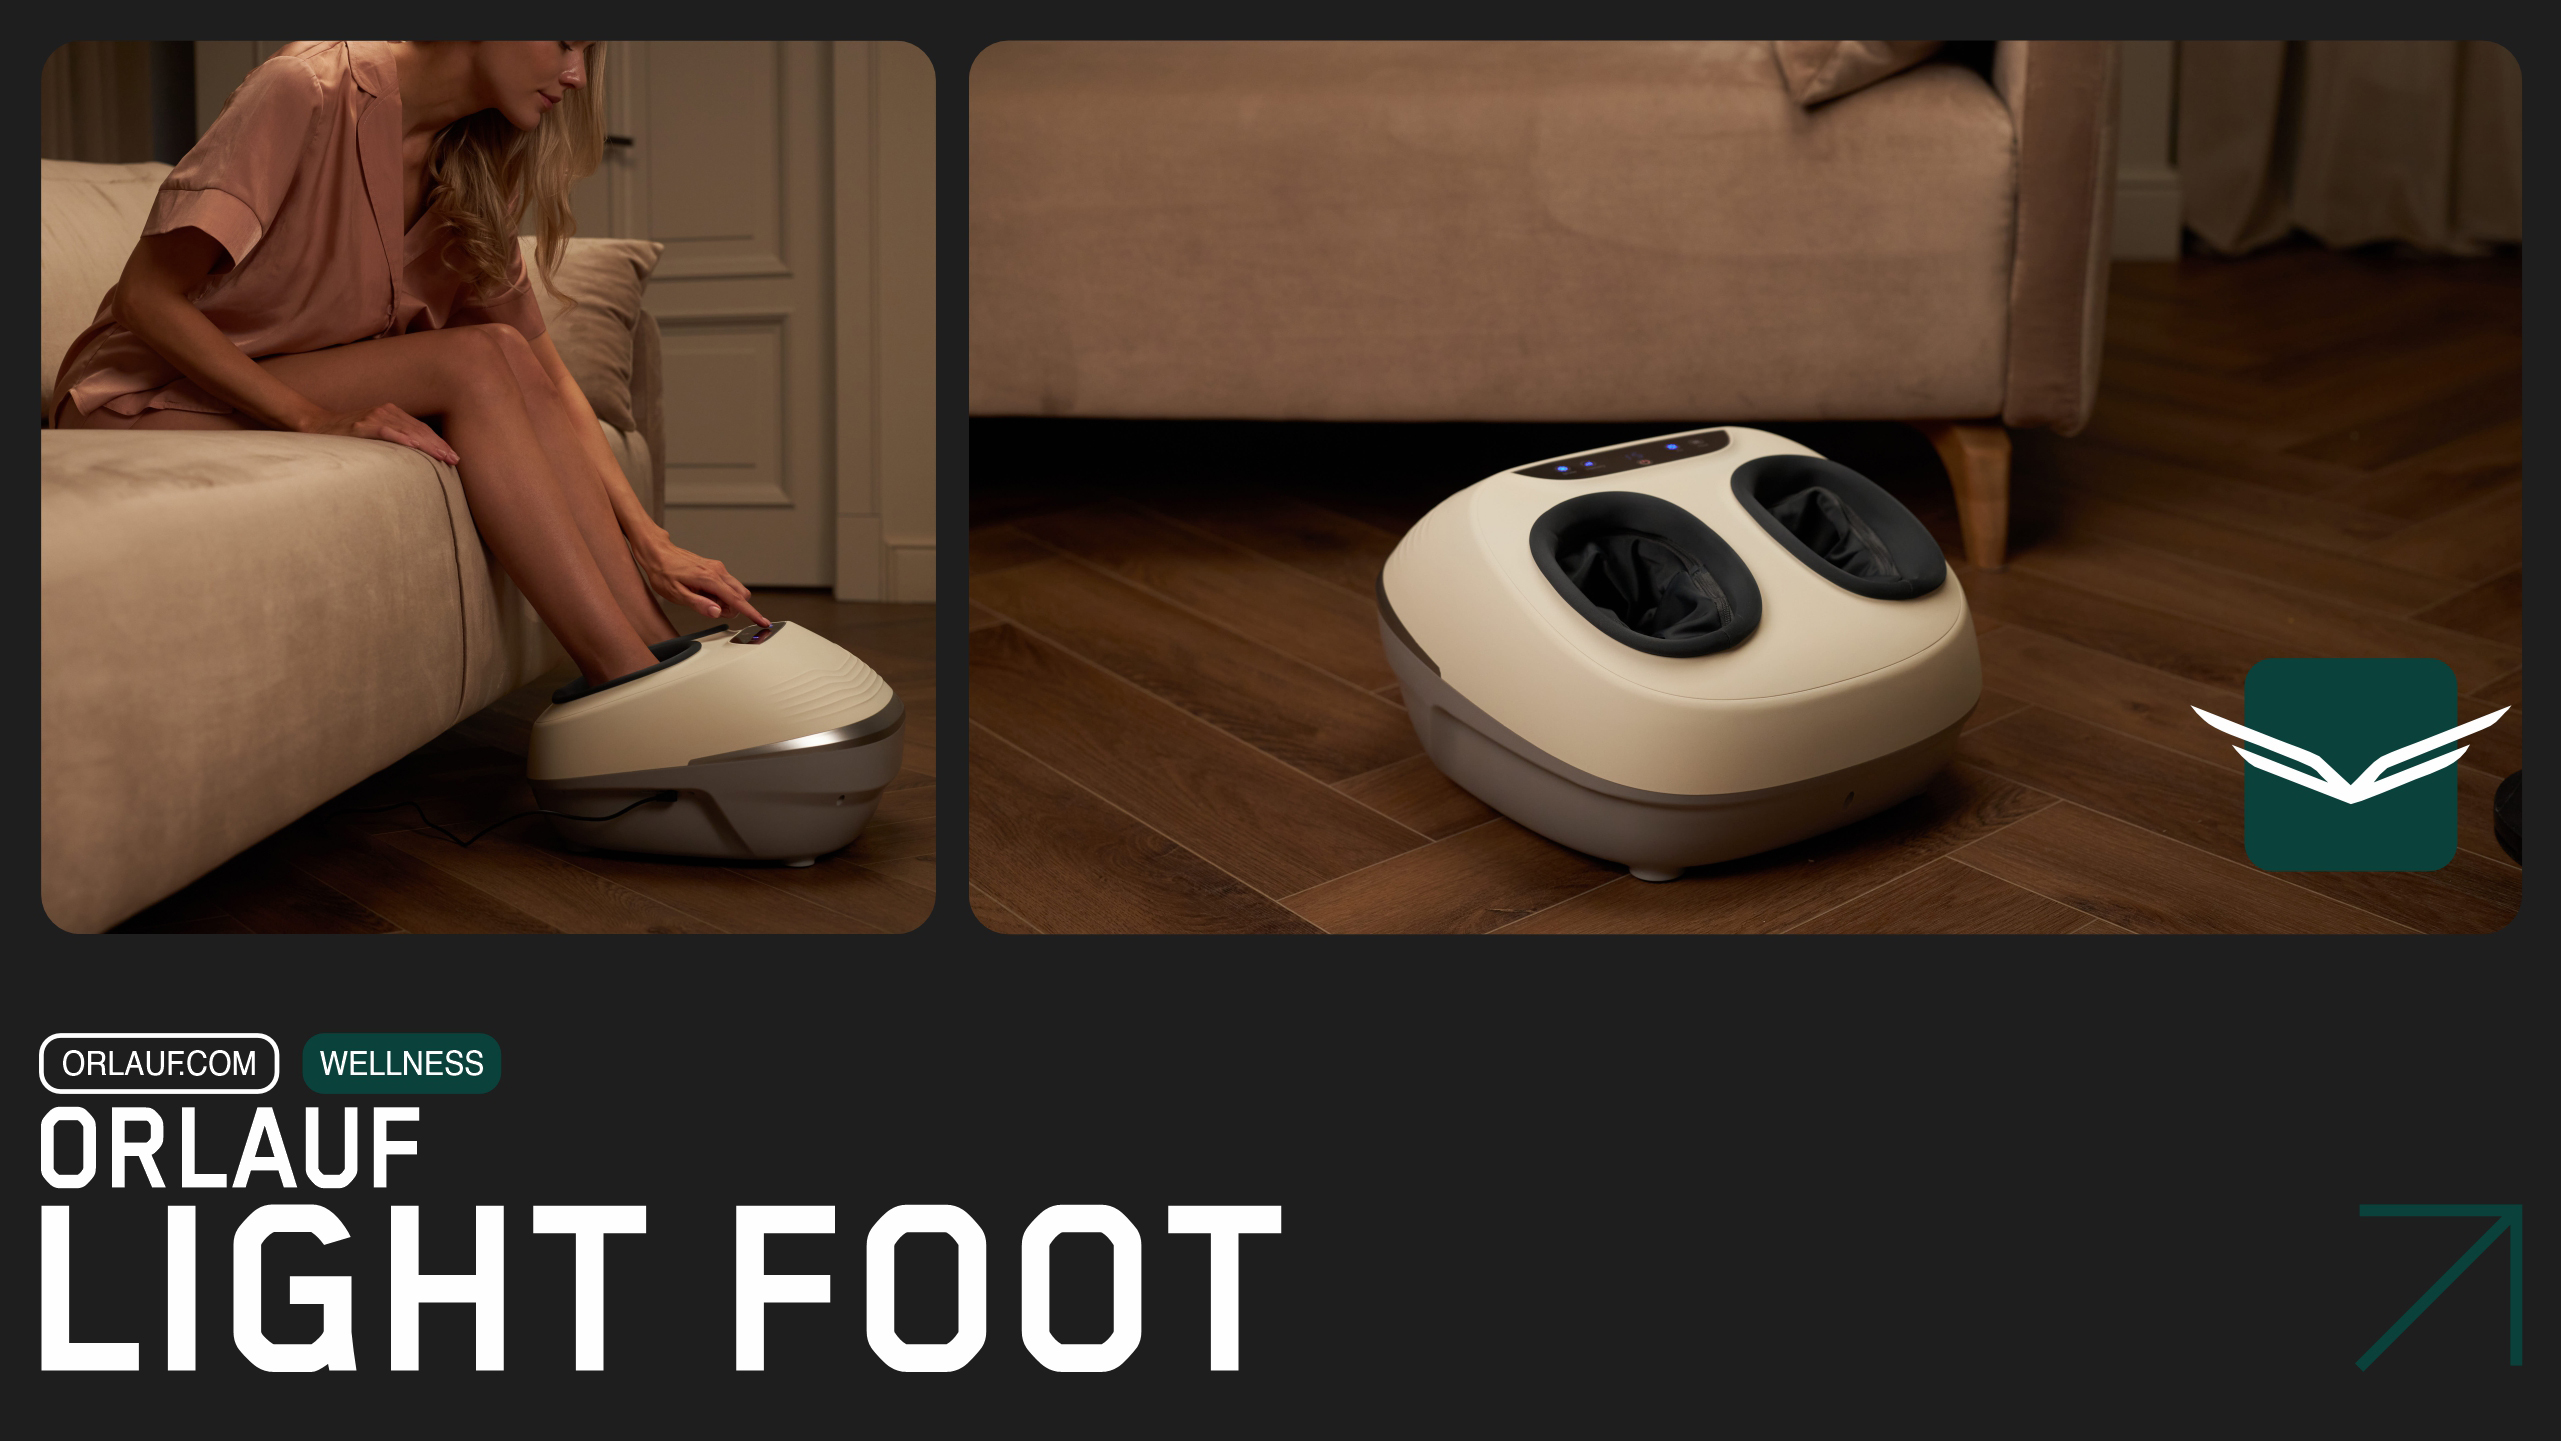 Video review of the massager Orlauf Light Foot